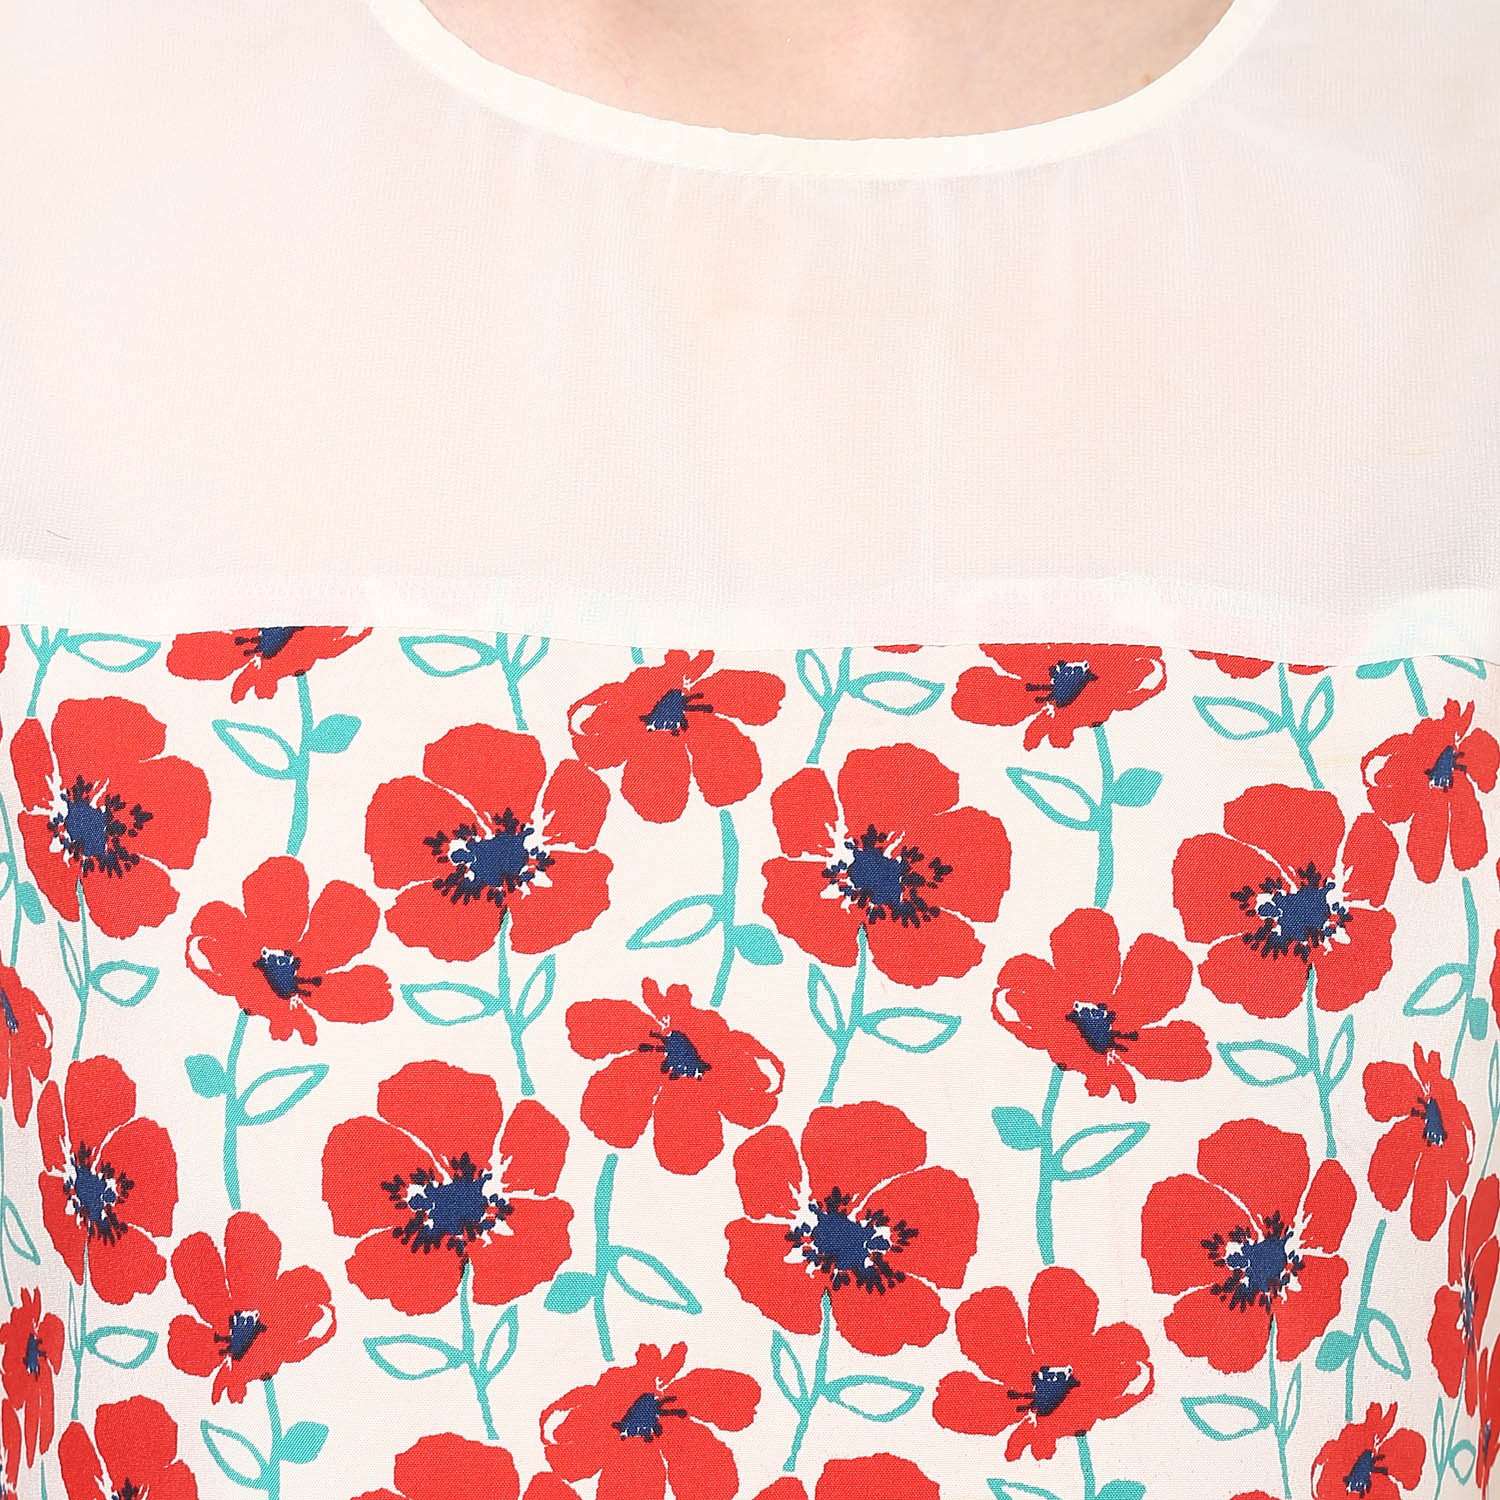 Women's Red Floral Top - Pannkh